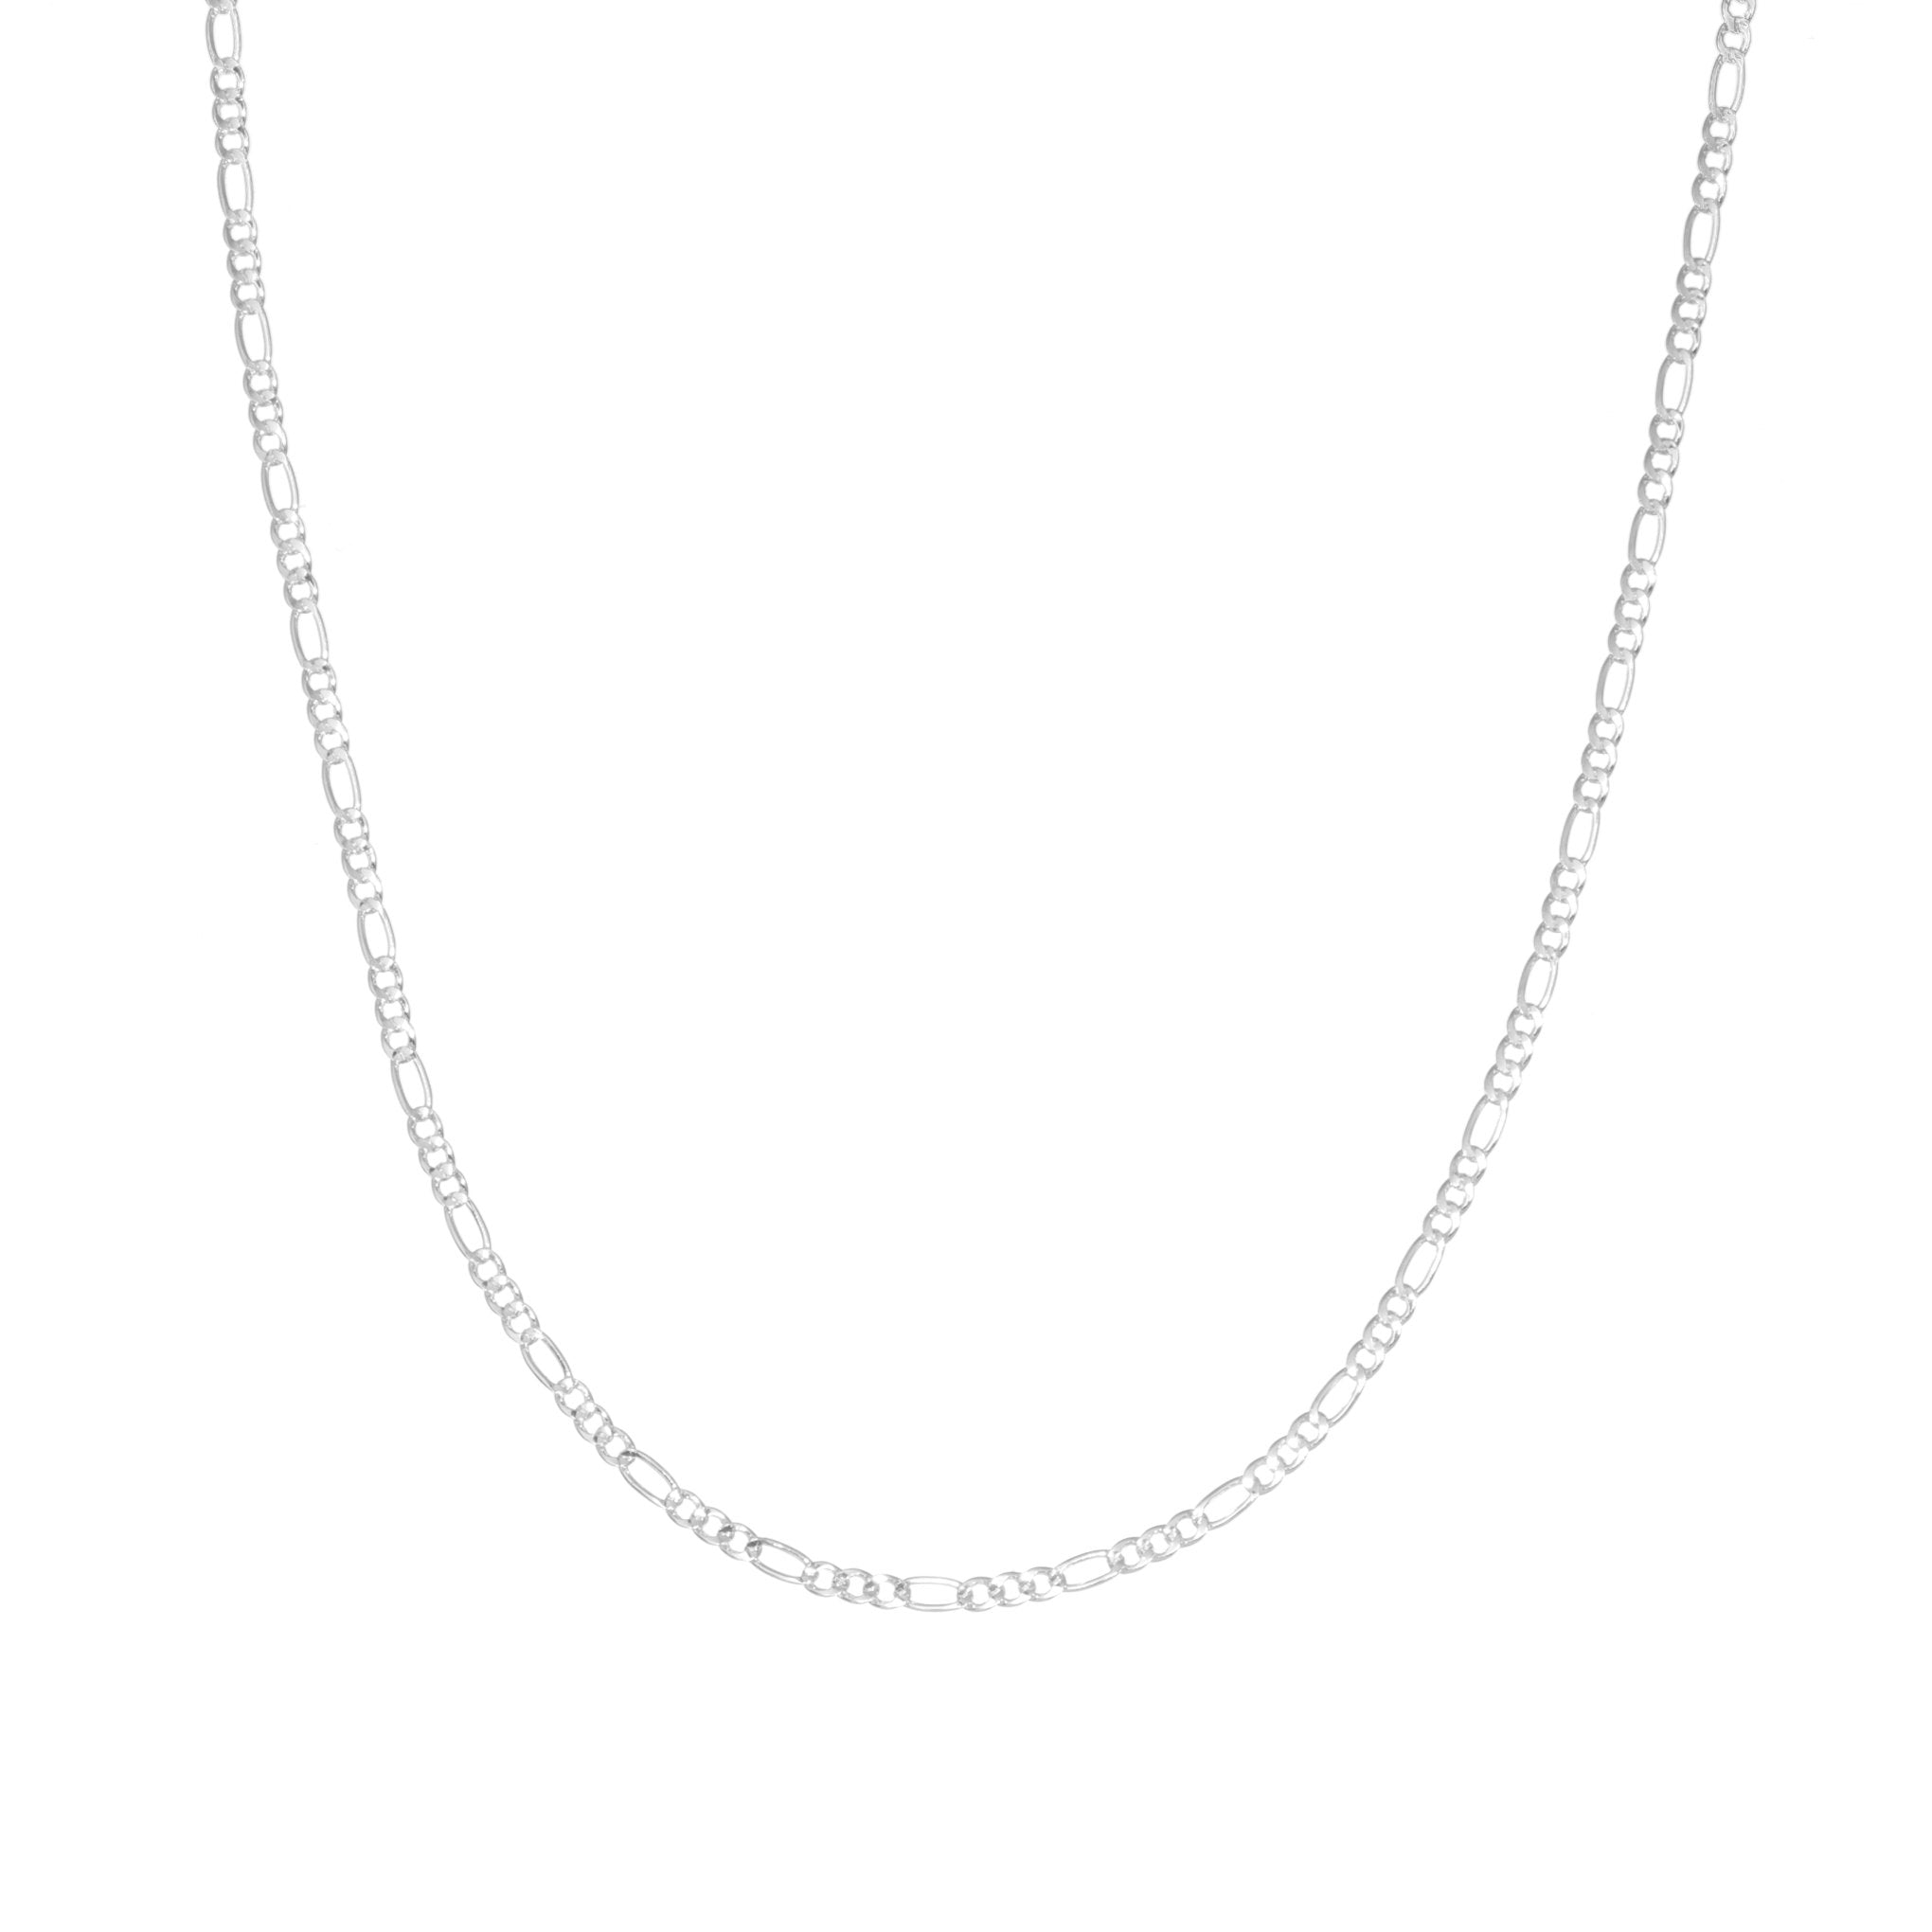 Necklaces of Mexican Silver certified – Prata